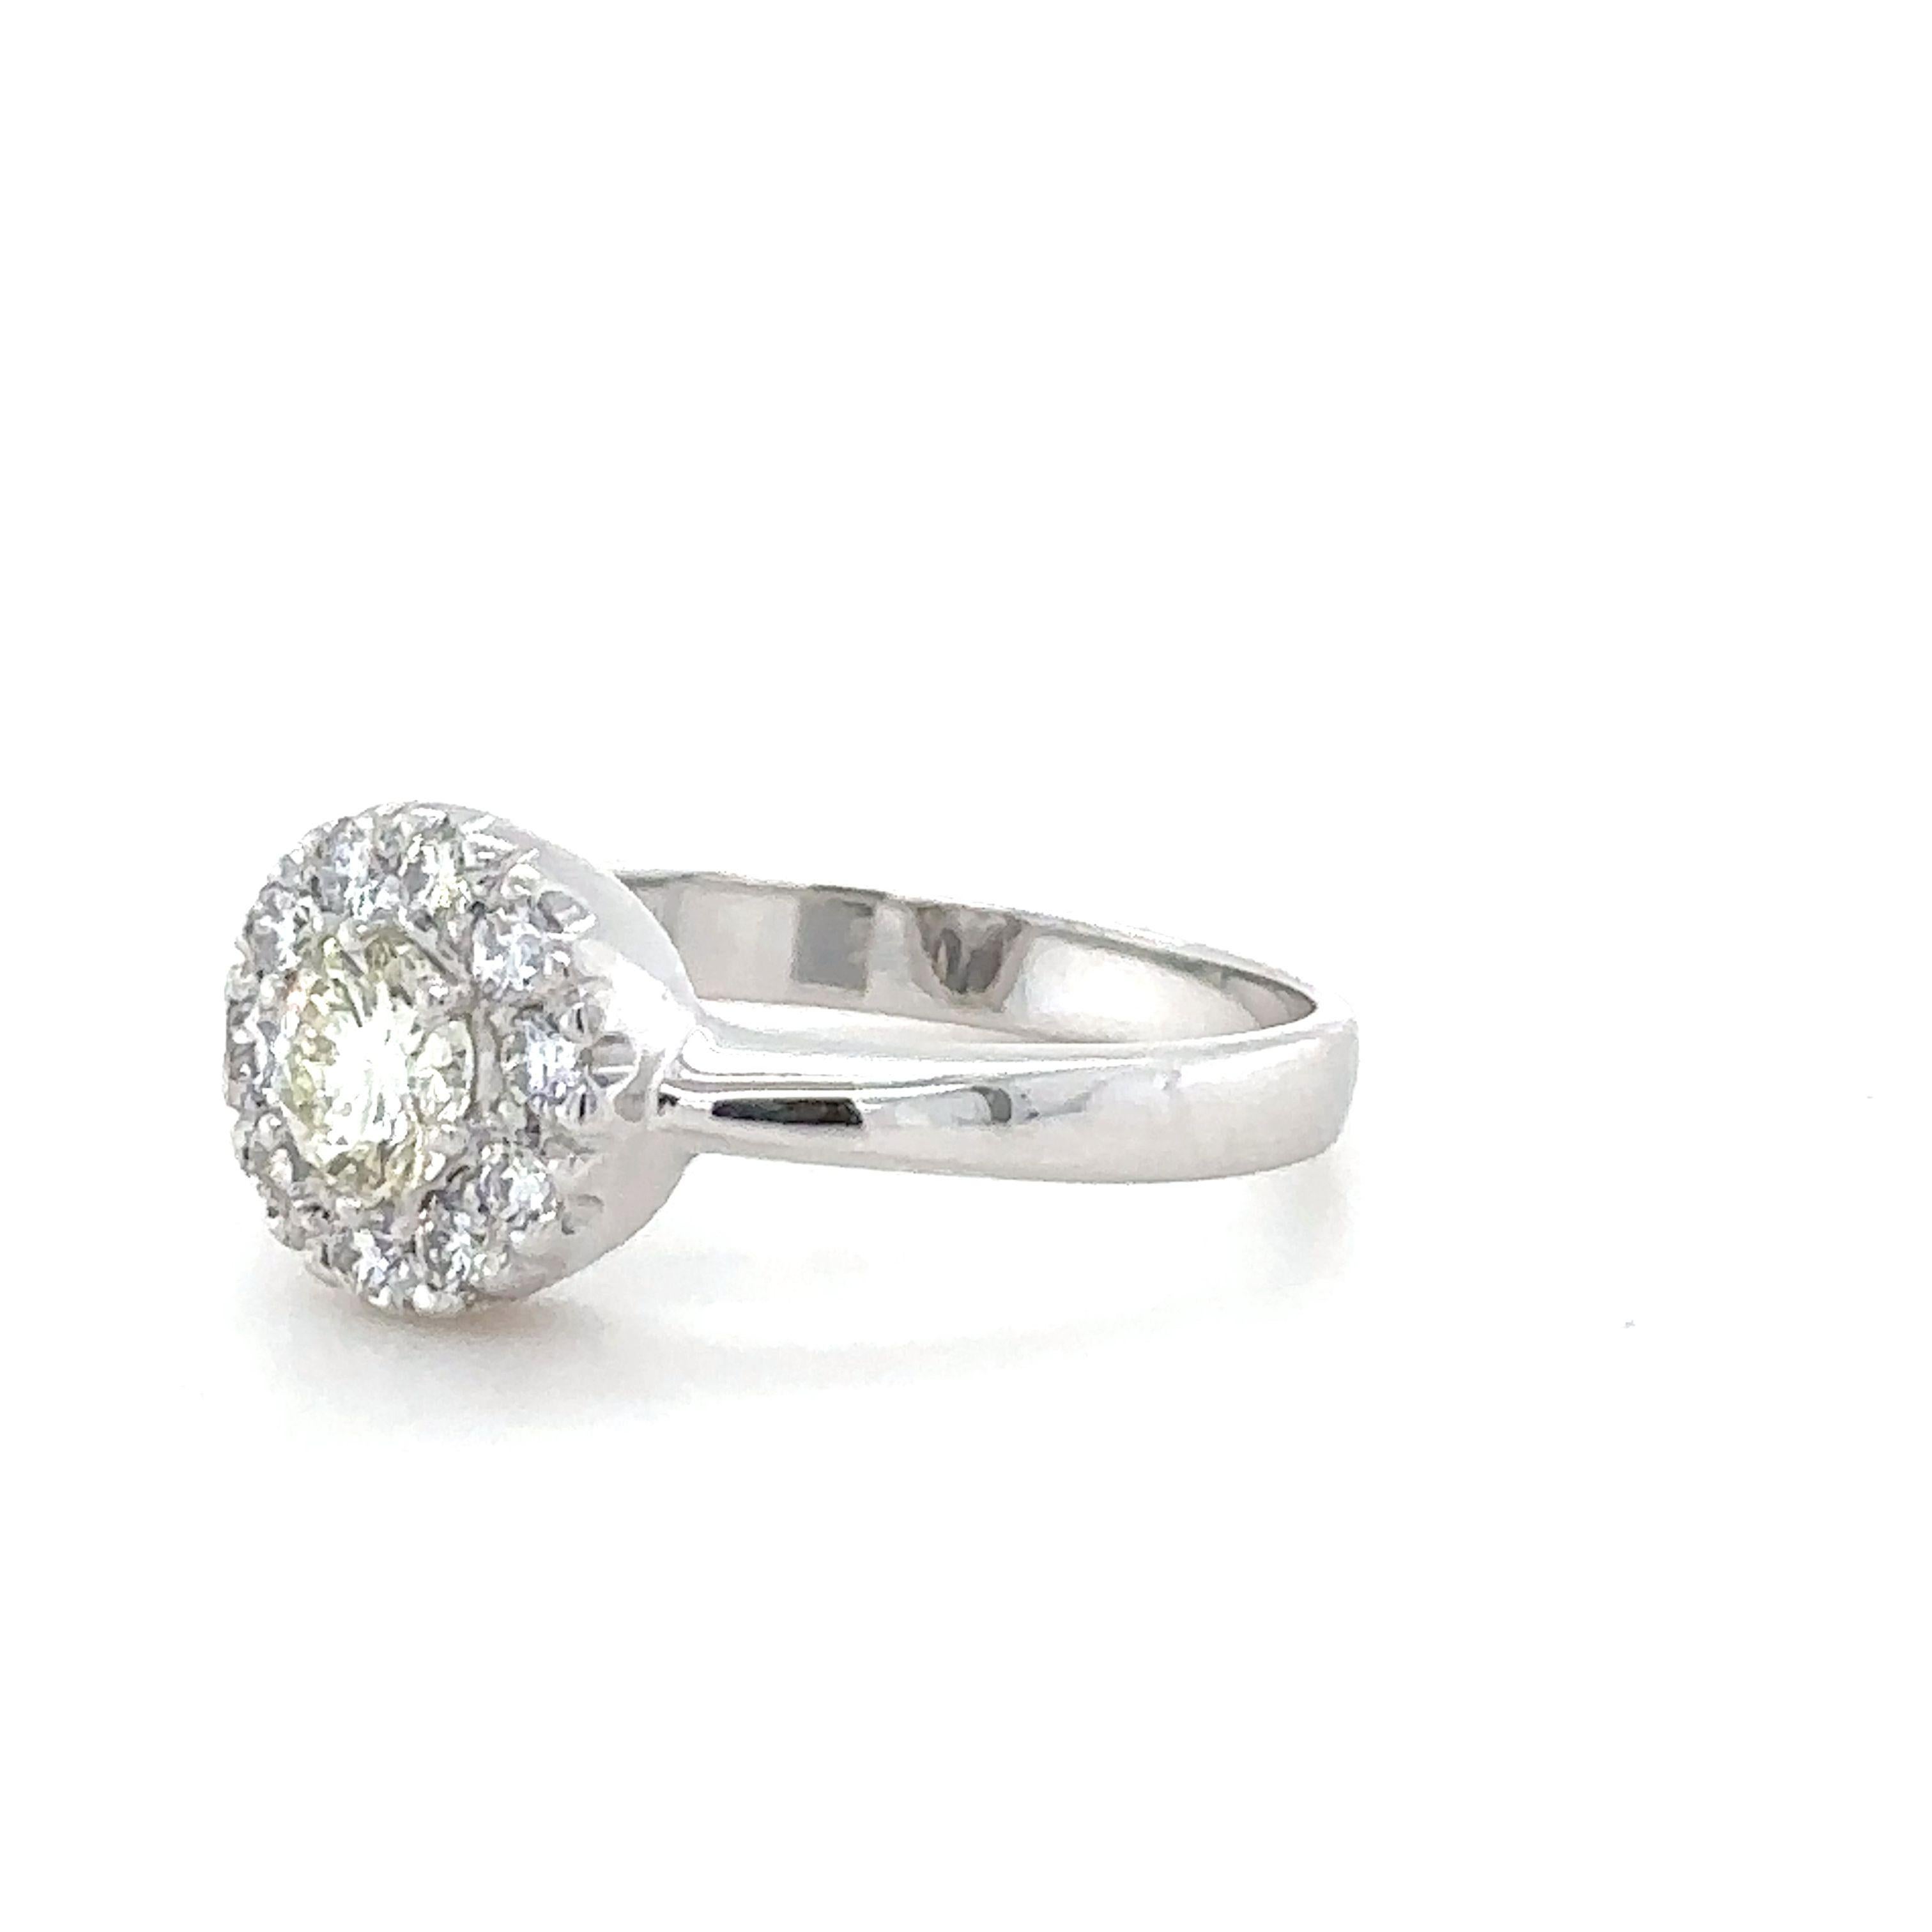 A Round Brilliant Cut Diamond Cluster Ring, made in 18ct White Gold, claw set with a border of 10 round brilliant cut diamonds on a 2.5mm reversed band. 
Diamonds 1 = 0.33ct, M Colour, VS Clarity  10 x diamonds = 0.30ct, G Colour, VS Clarity. Weight